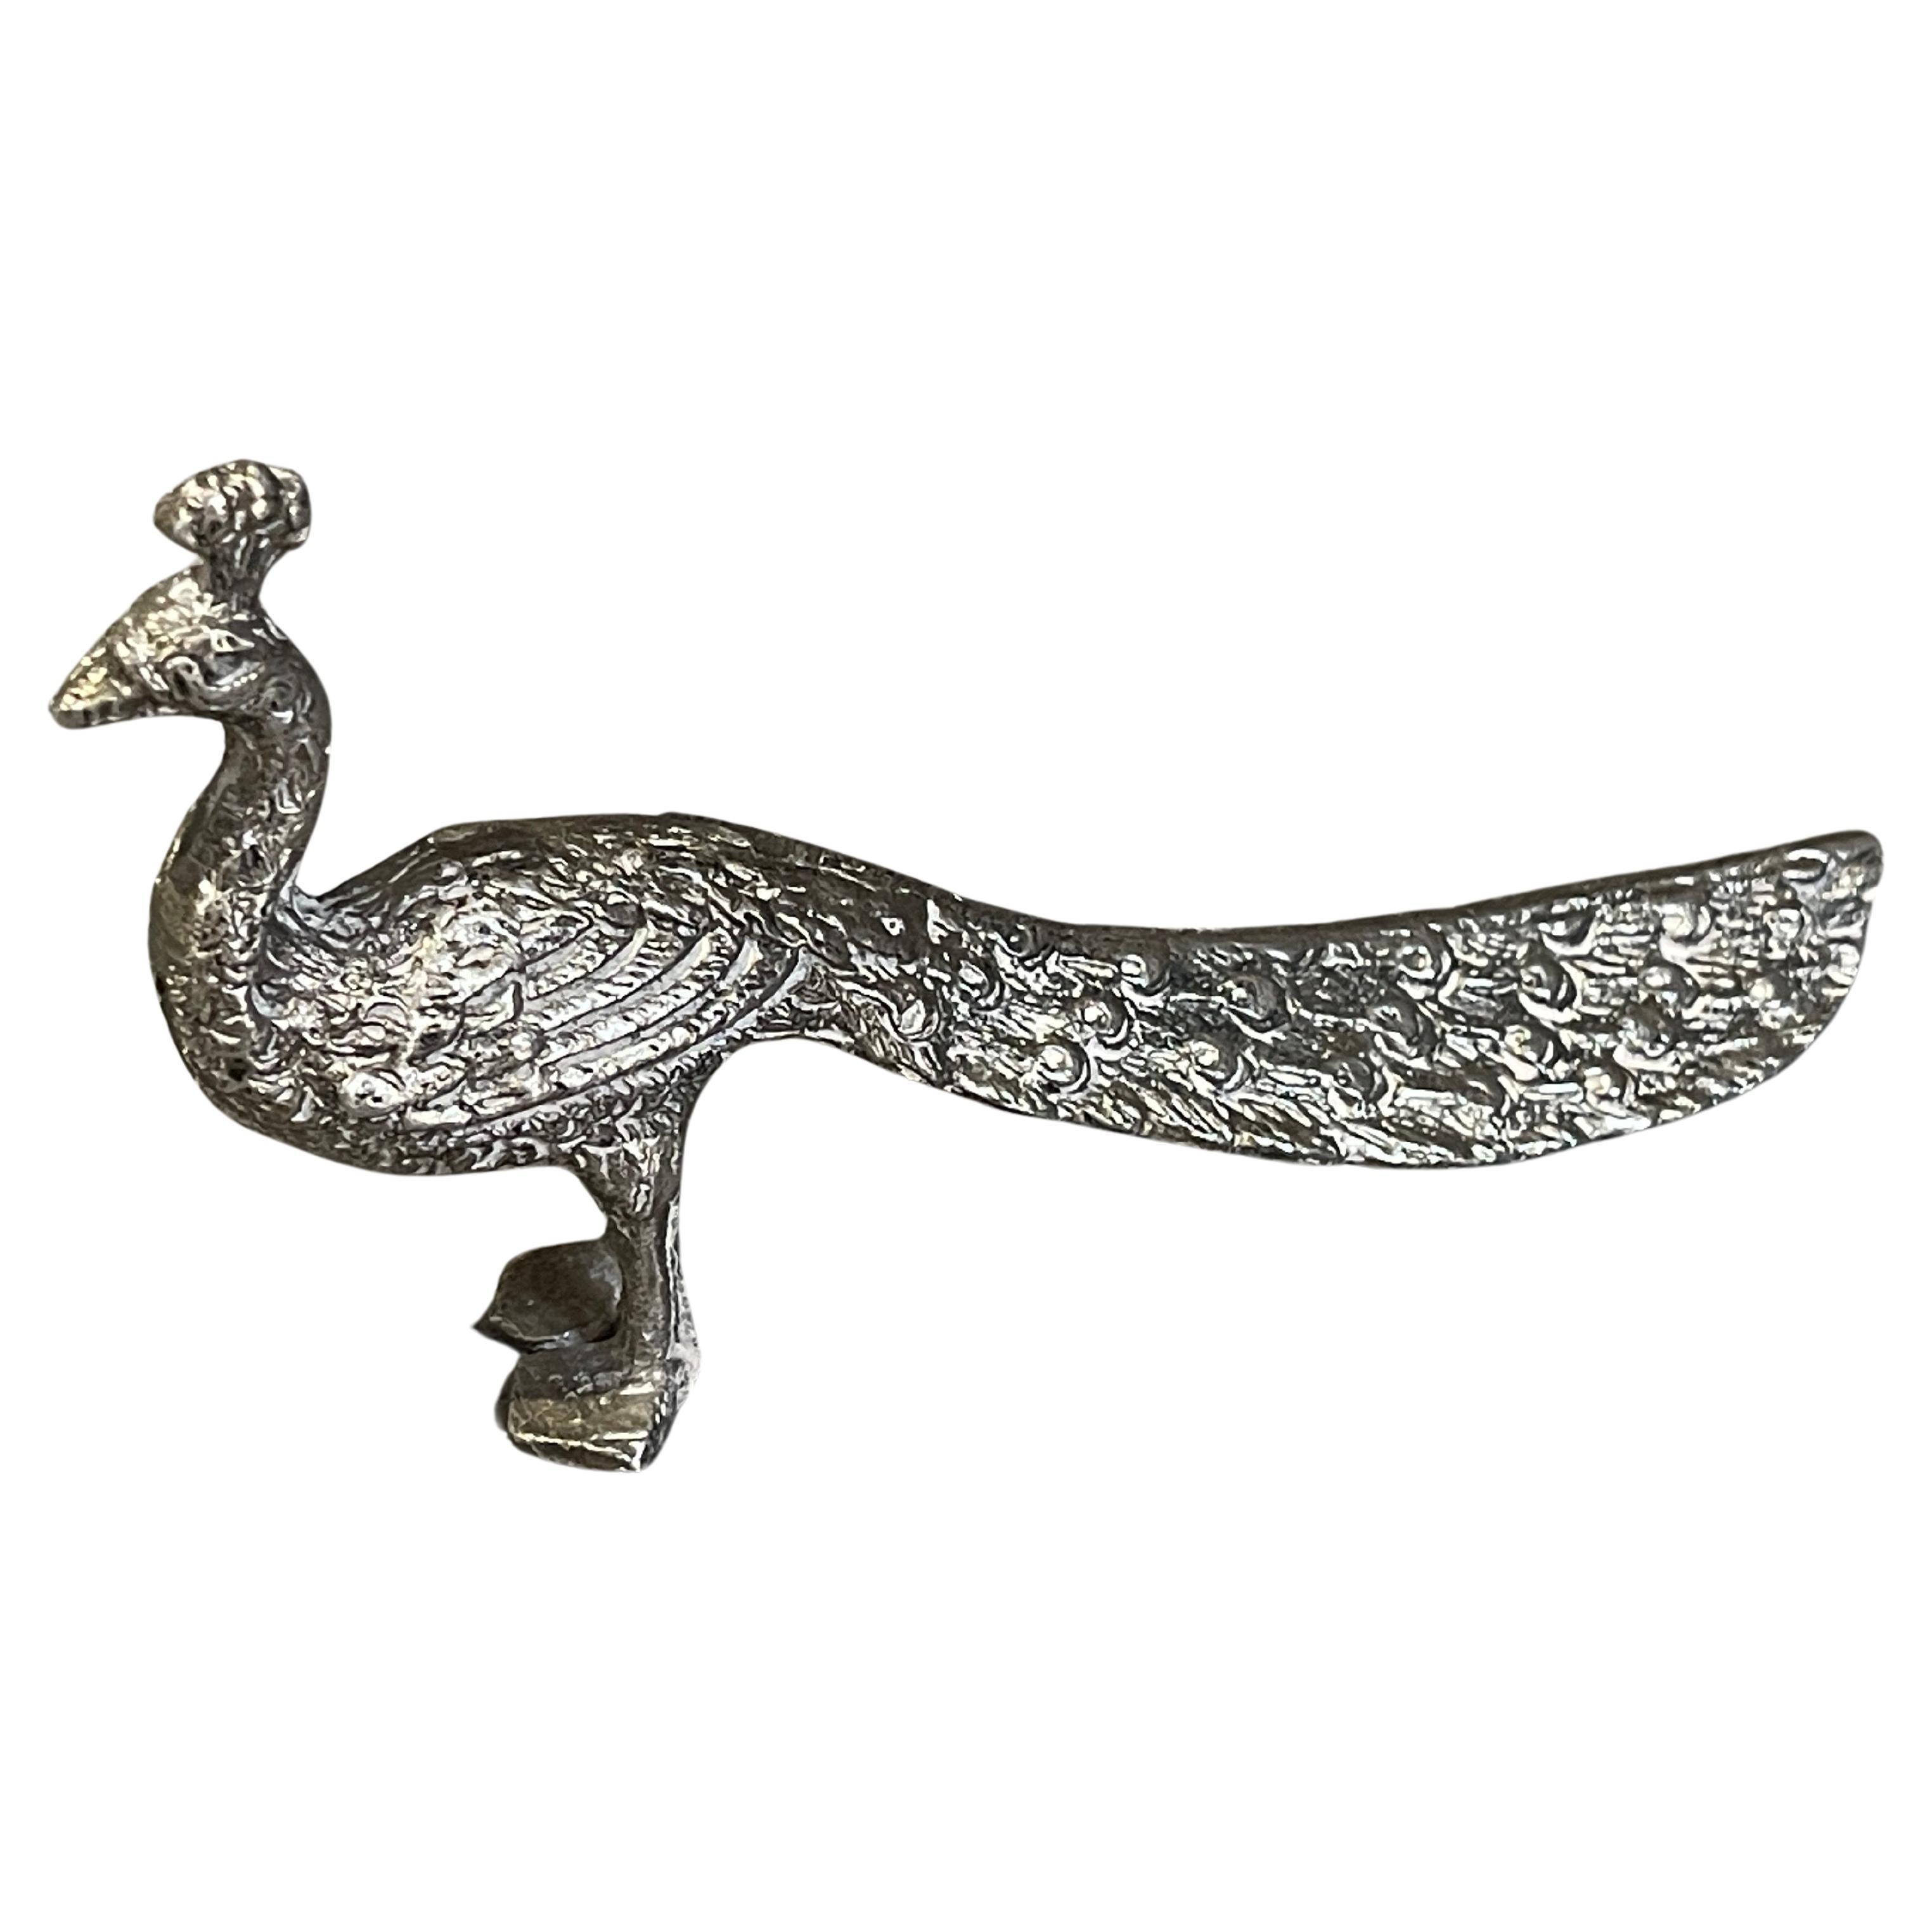 "Standing peacock" Antique silver plated, Decorative animal object , home decor  For Sale